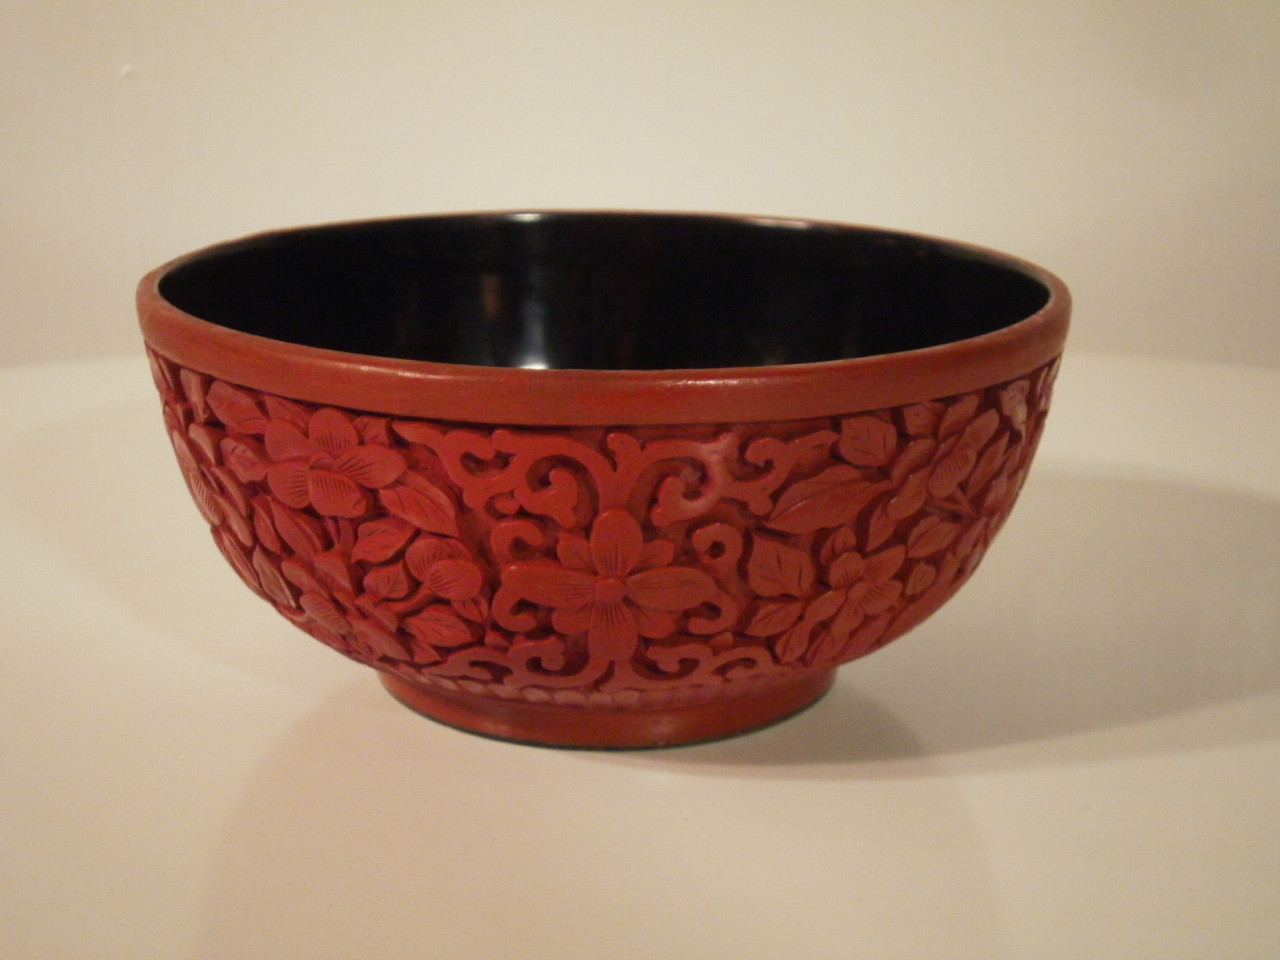 chinese cinnabar lacquer vase of late qing chinese carved cinnabar lacquer on metal bowl ebay inside jpg p2230048 jpg